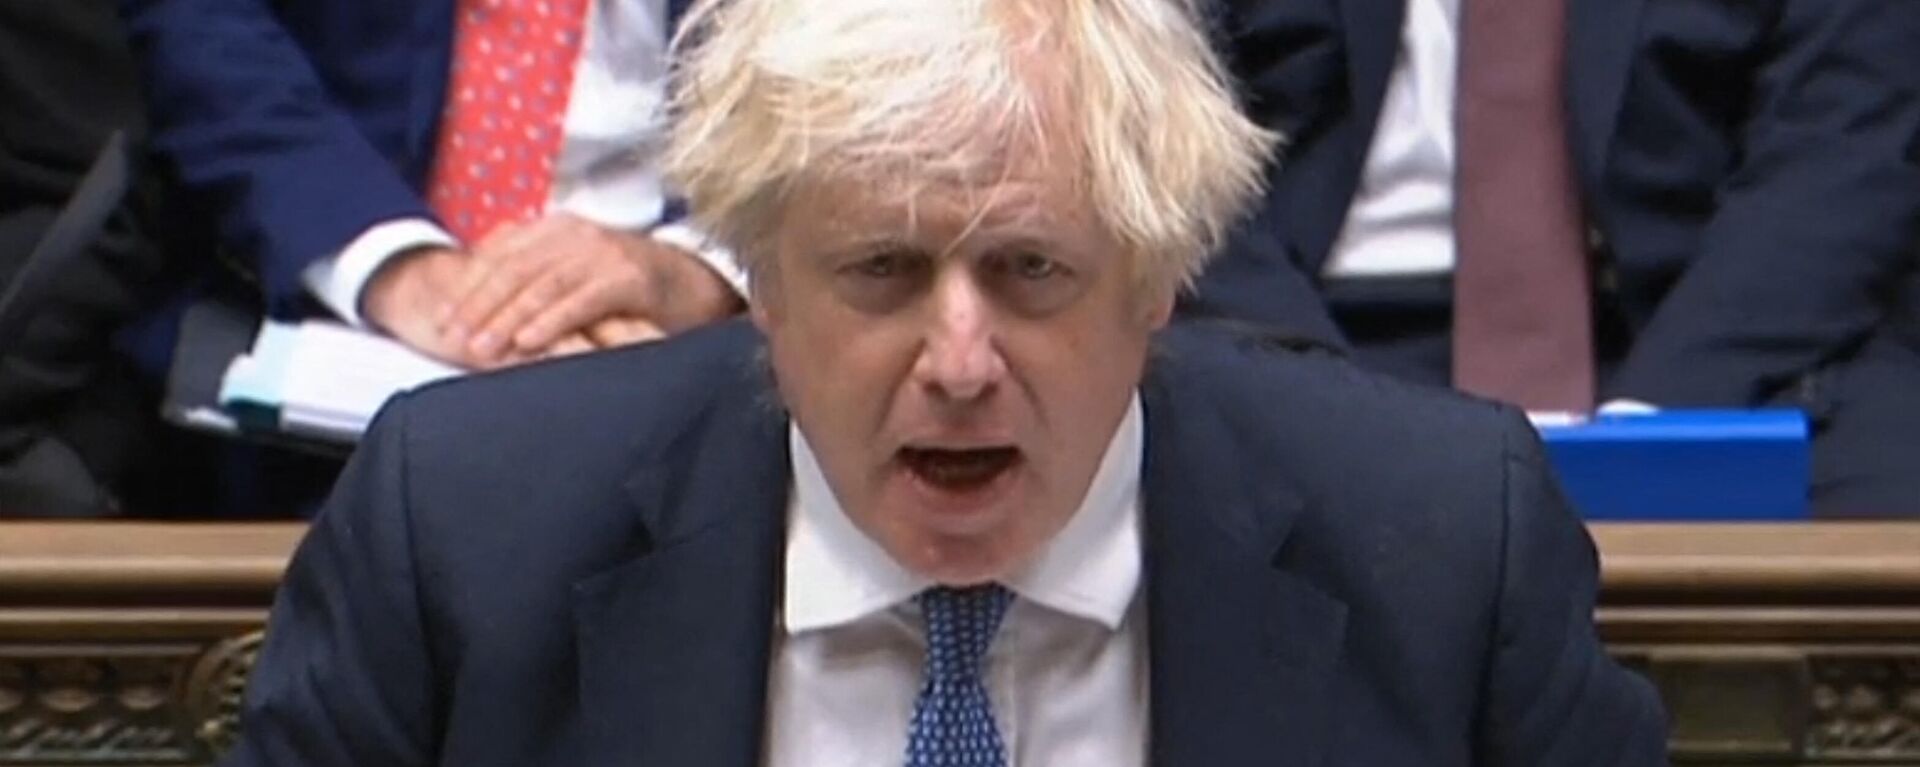 A video grab from footage broadcast by the UK Parliament's Parliamentary Recording Unit (PRU) shows British Prime Minister Boris Johnson speaking during Prime Minister's Questions (PMQs), in the House of Commons in London on December 8, 2021.  - Sputnik International, 1920, 08.12.2021